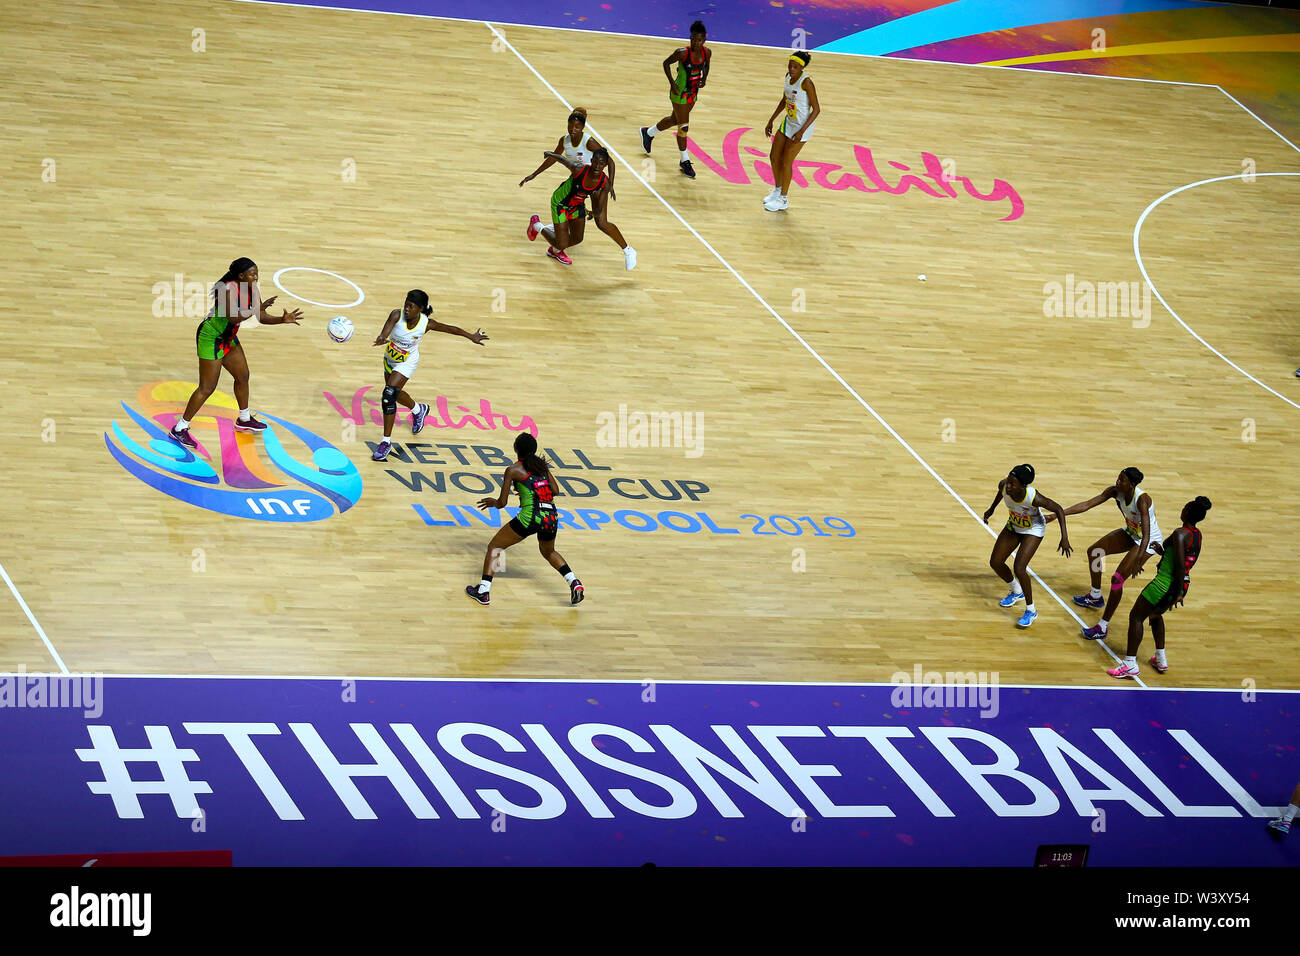 General view of match action between Zimbabwe and Milawi during the netball World Cup match at the M&S Bank Arena, Liverpool. Stock Photo